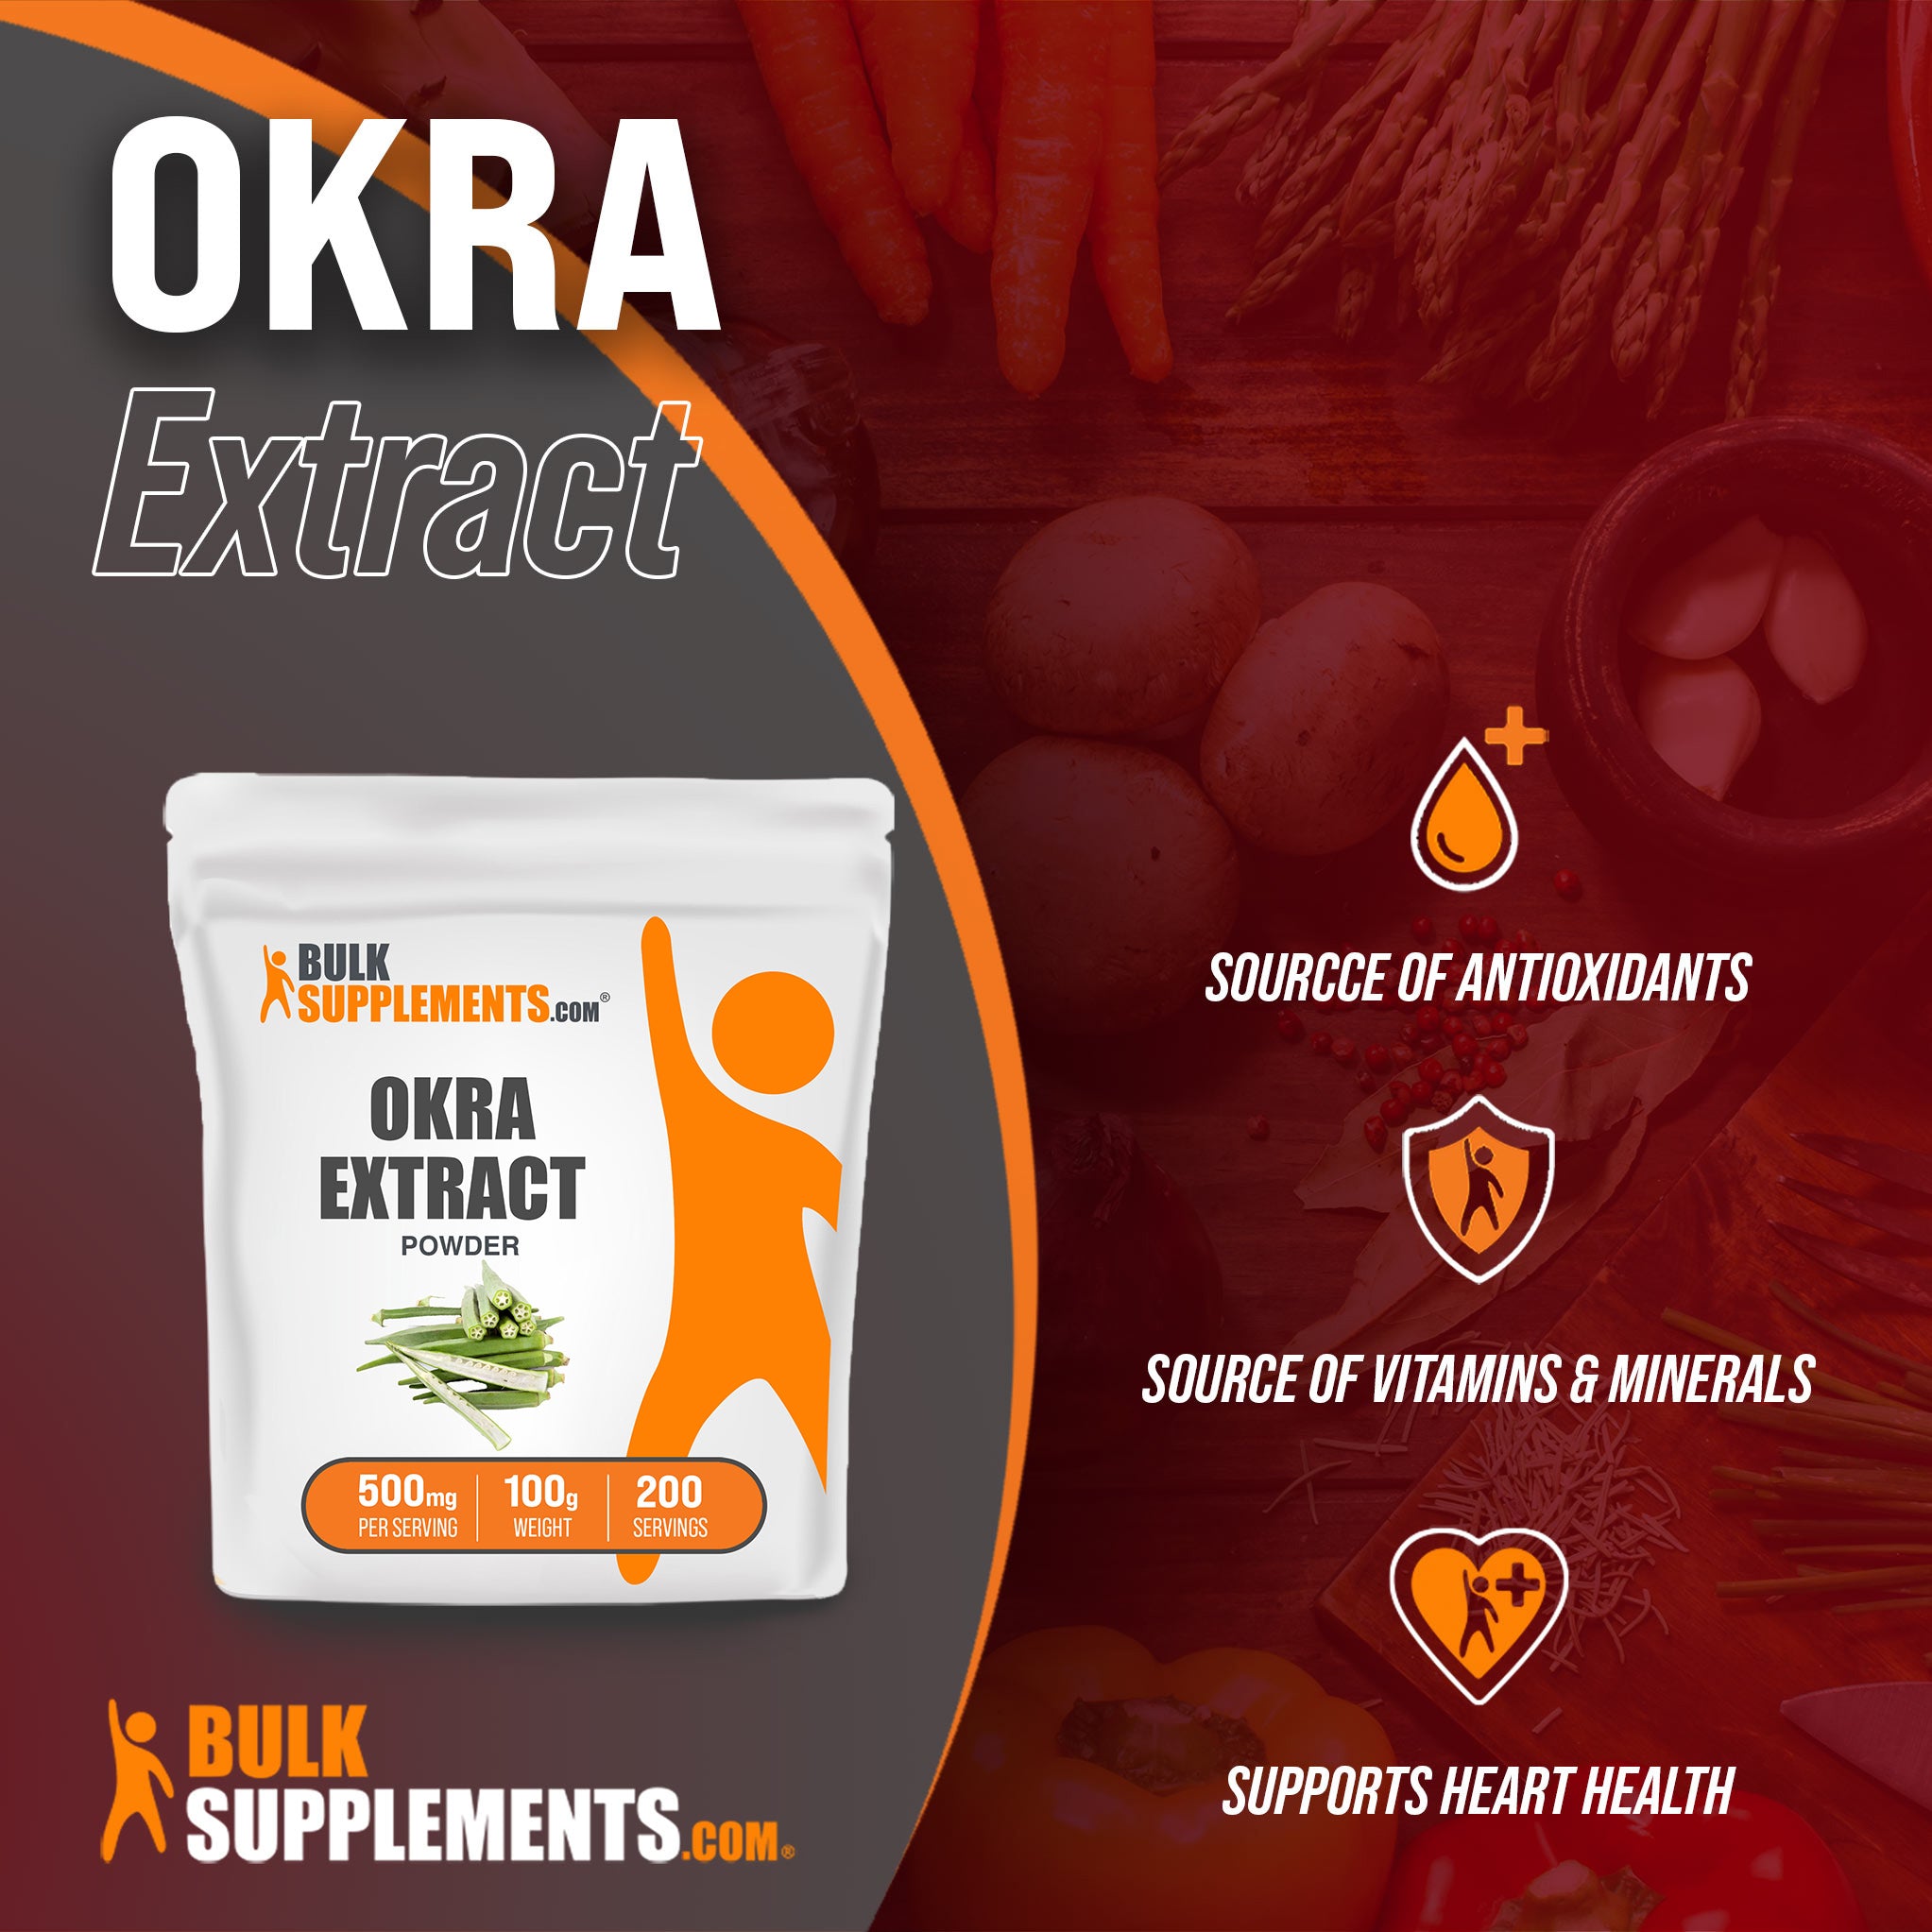 Benefits of Okra Extract: source of antioxidants, source of vitamins and minerals, supports heart health